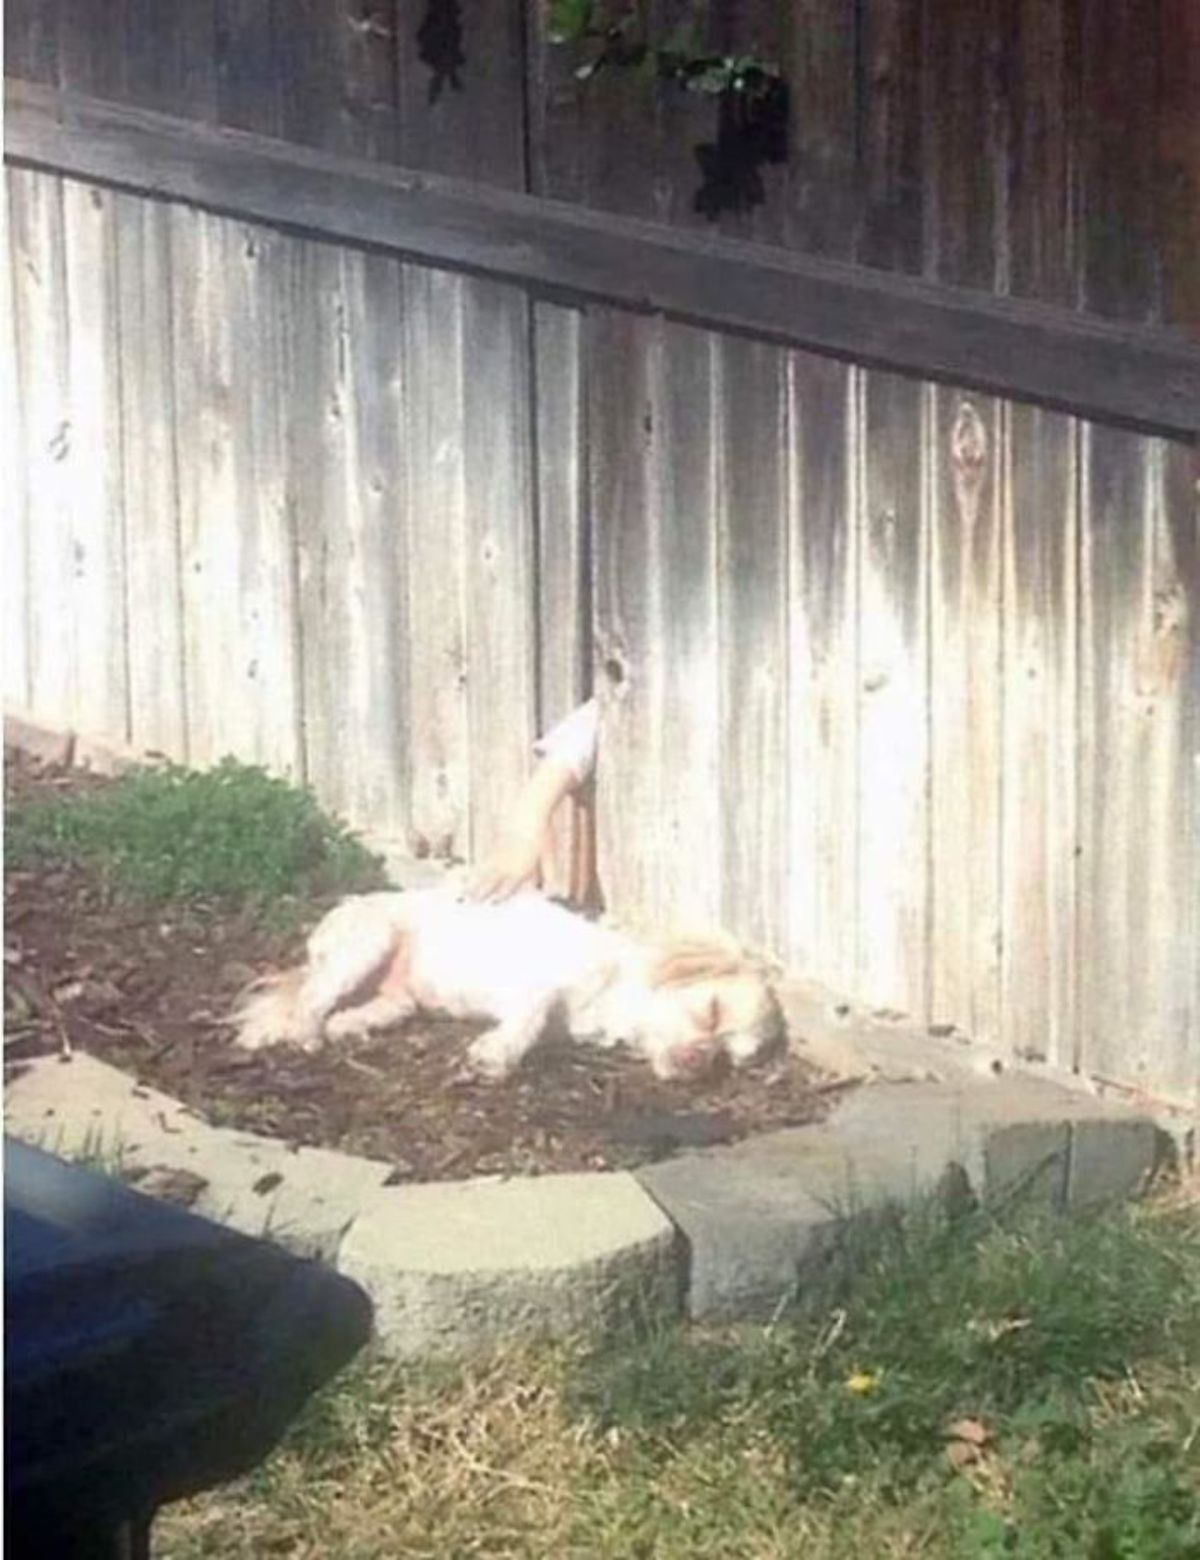 white dog laying on soil next to a wooden fence with someone's hand poking out to pet the dog